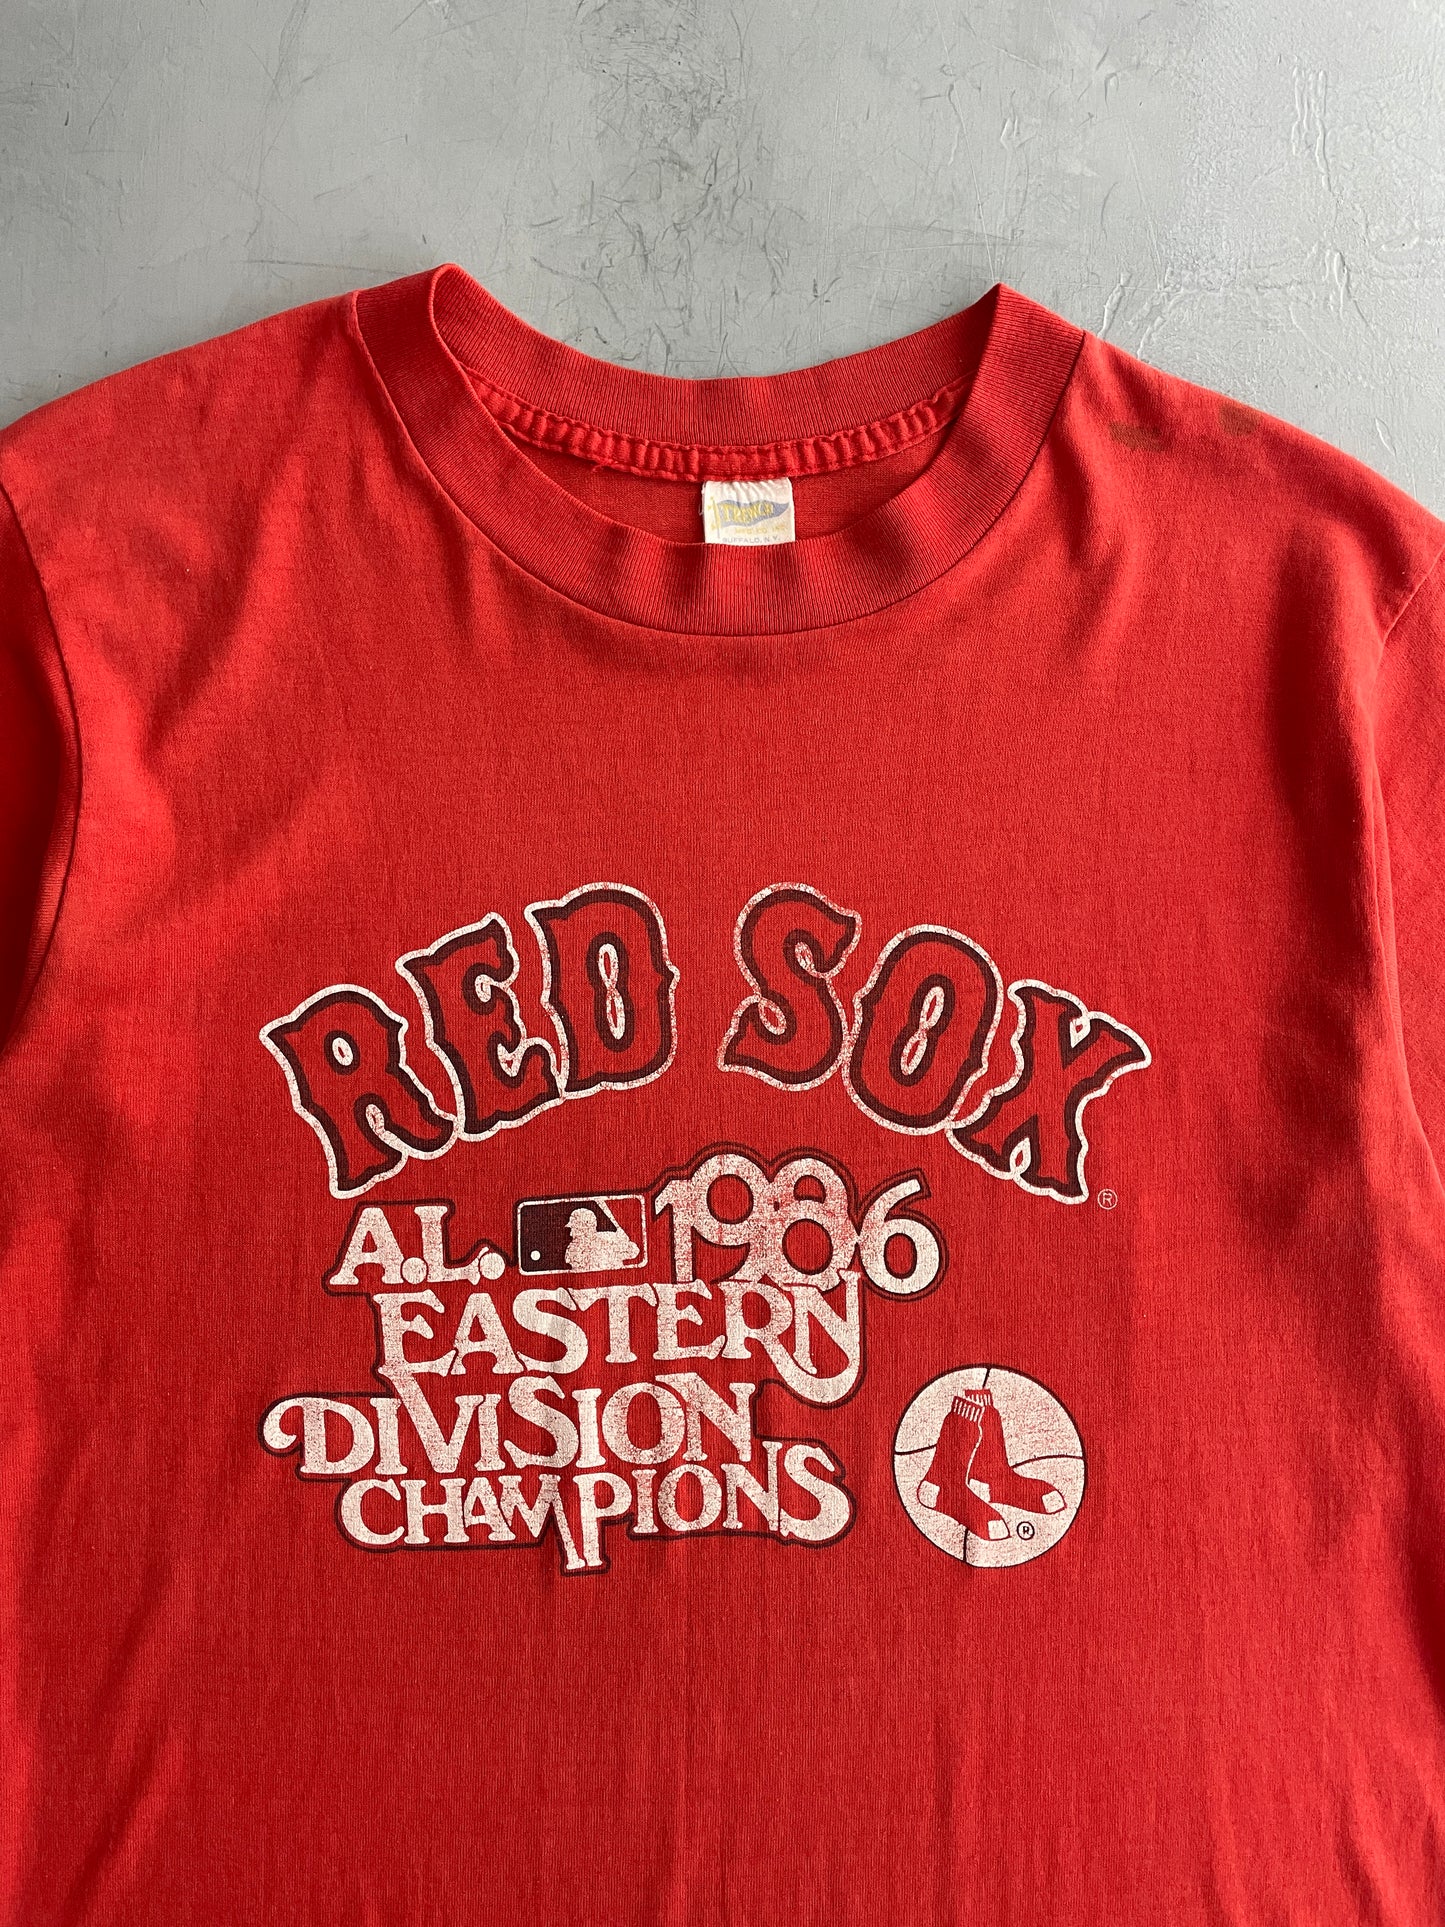 '86 Red Sox Division Champs Tee [M]